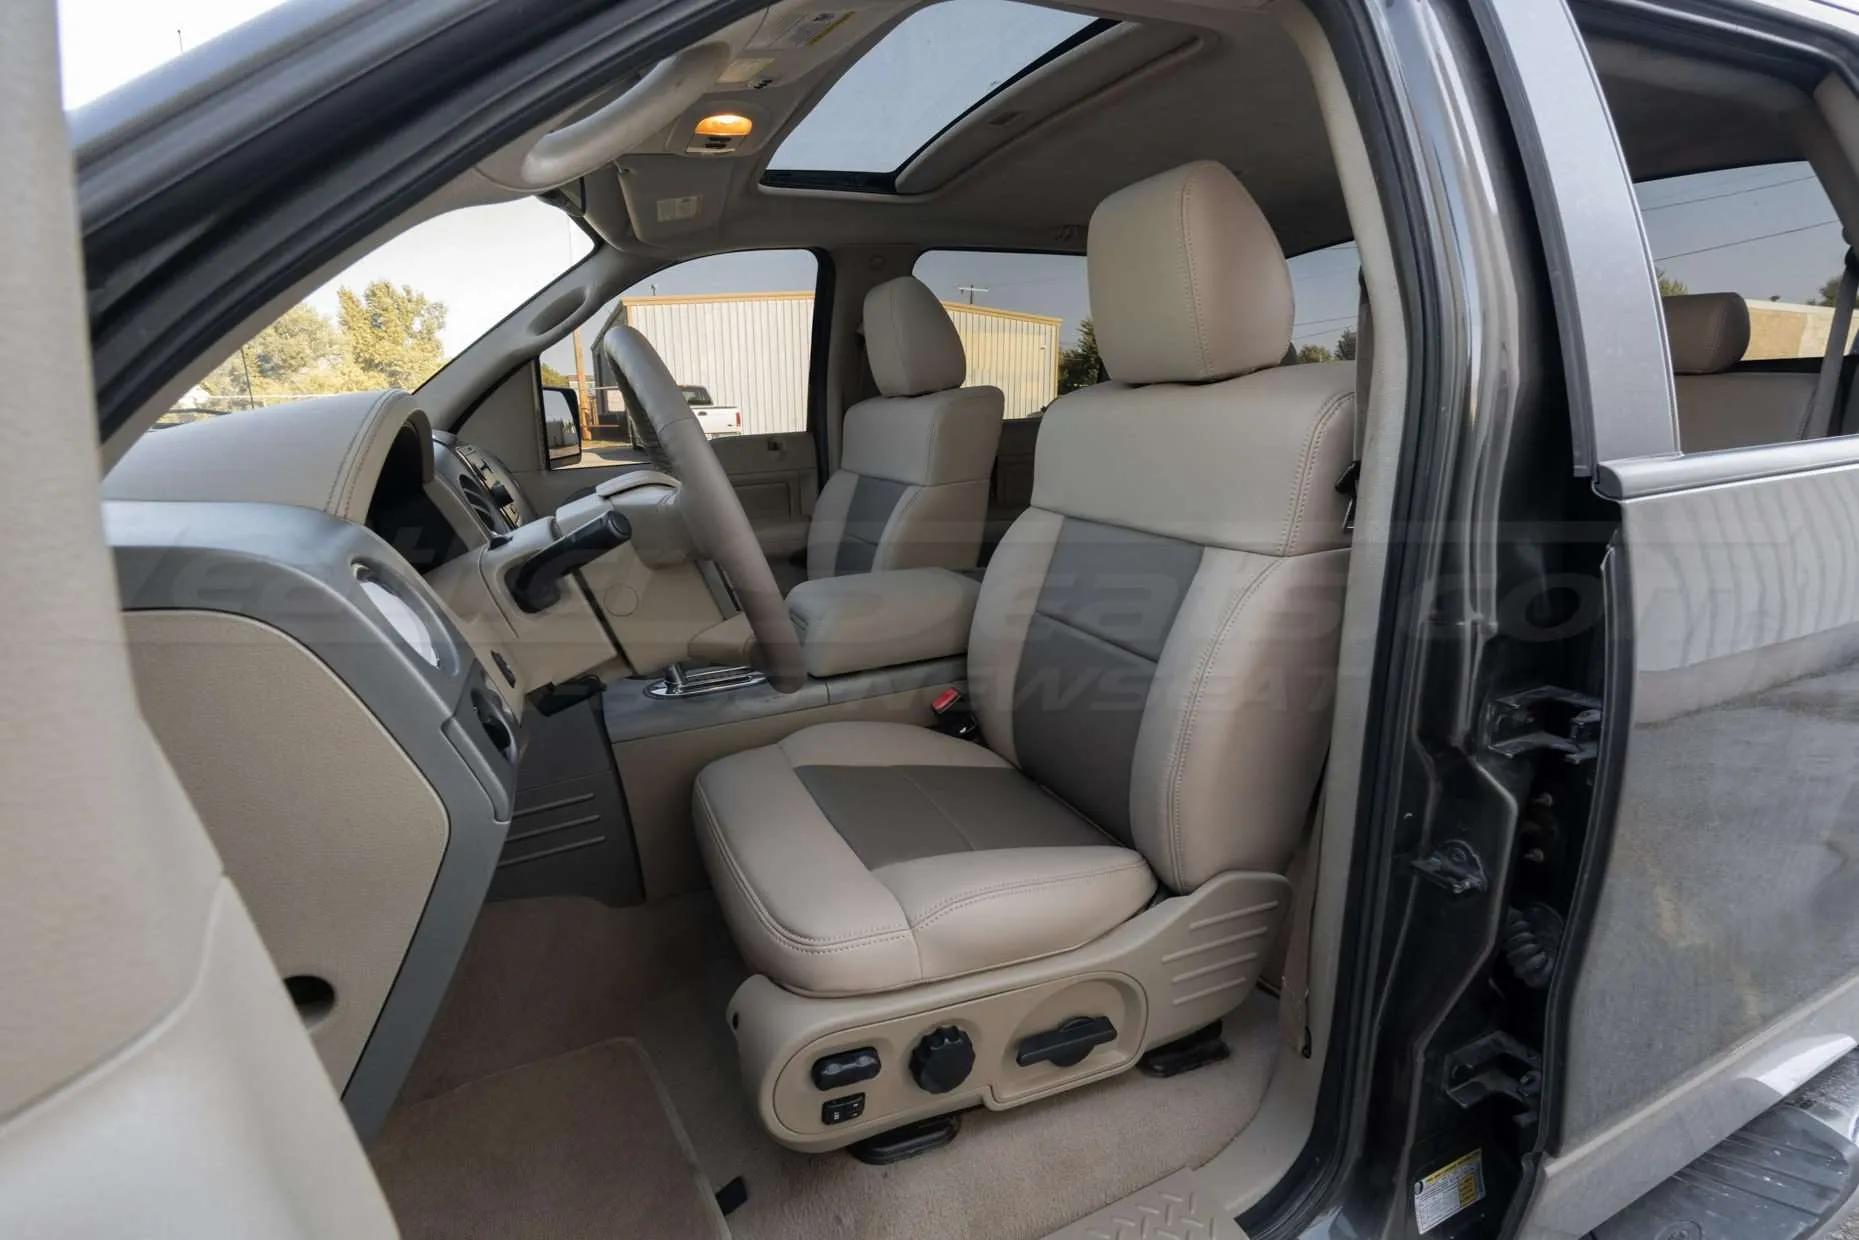 Ford F150 SuperCrew Lariat wit installed Adobe & Driftwood leather seats - Front driver's seat